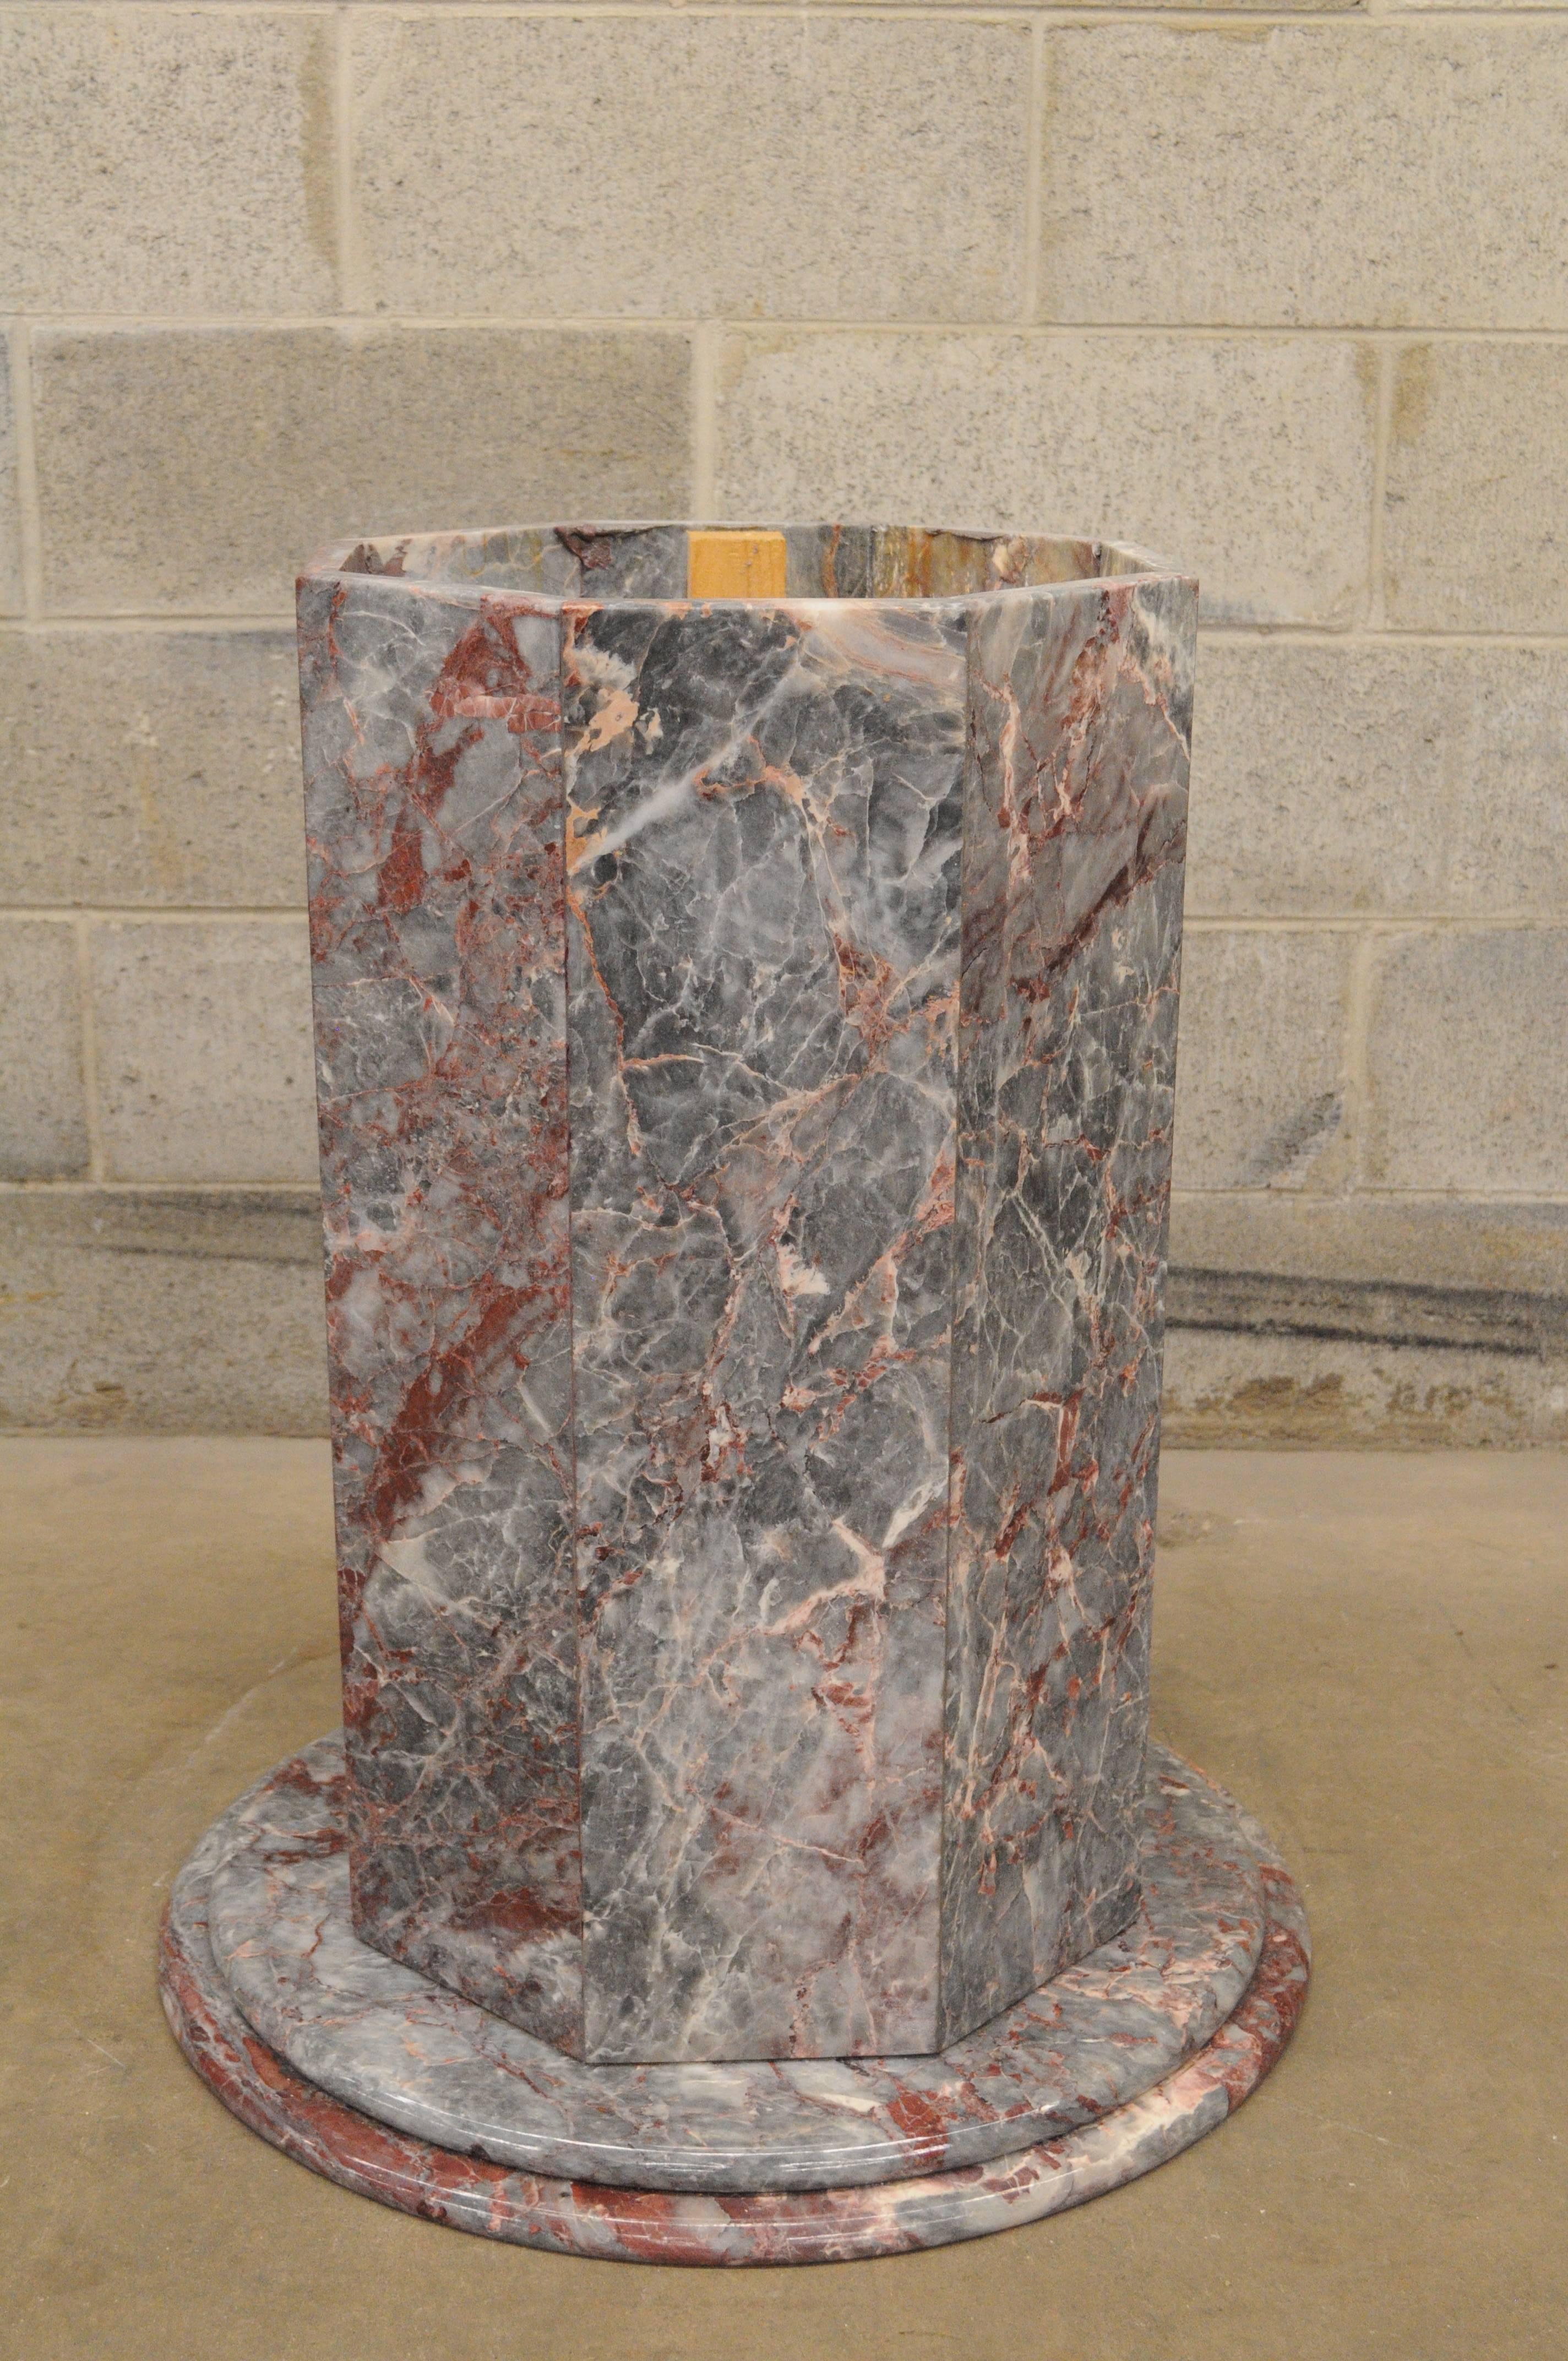 Unique vintage Italian rogue marble octagonal dining or center table pedestal base with grey and pink veins and round plinth (base only, no top). This item features an octagonal central column with round step down base and beautiful veins. Item will